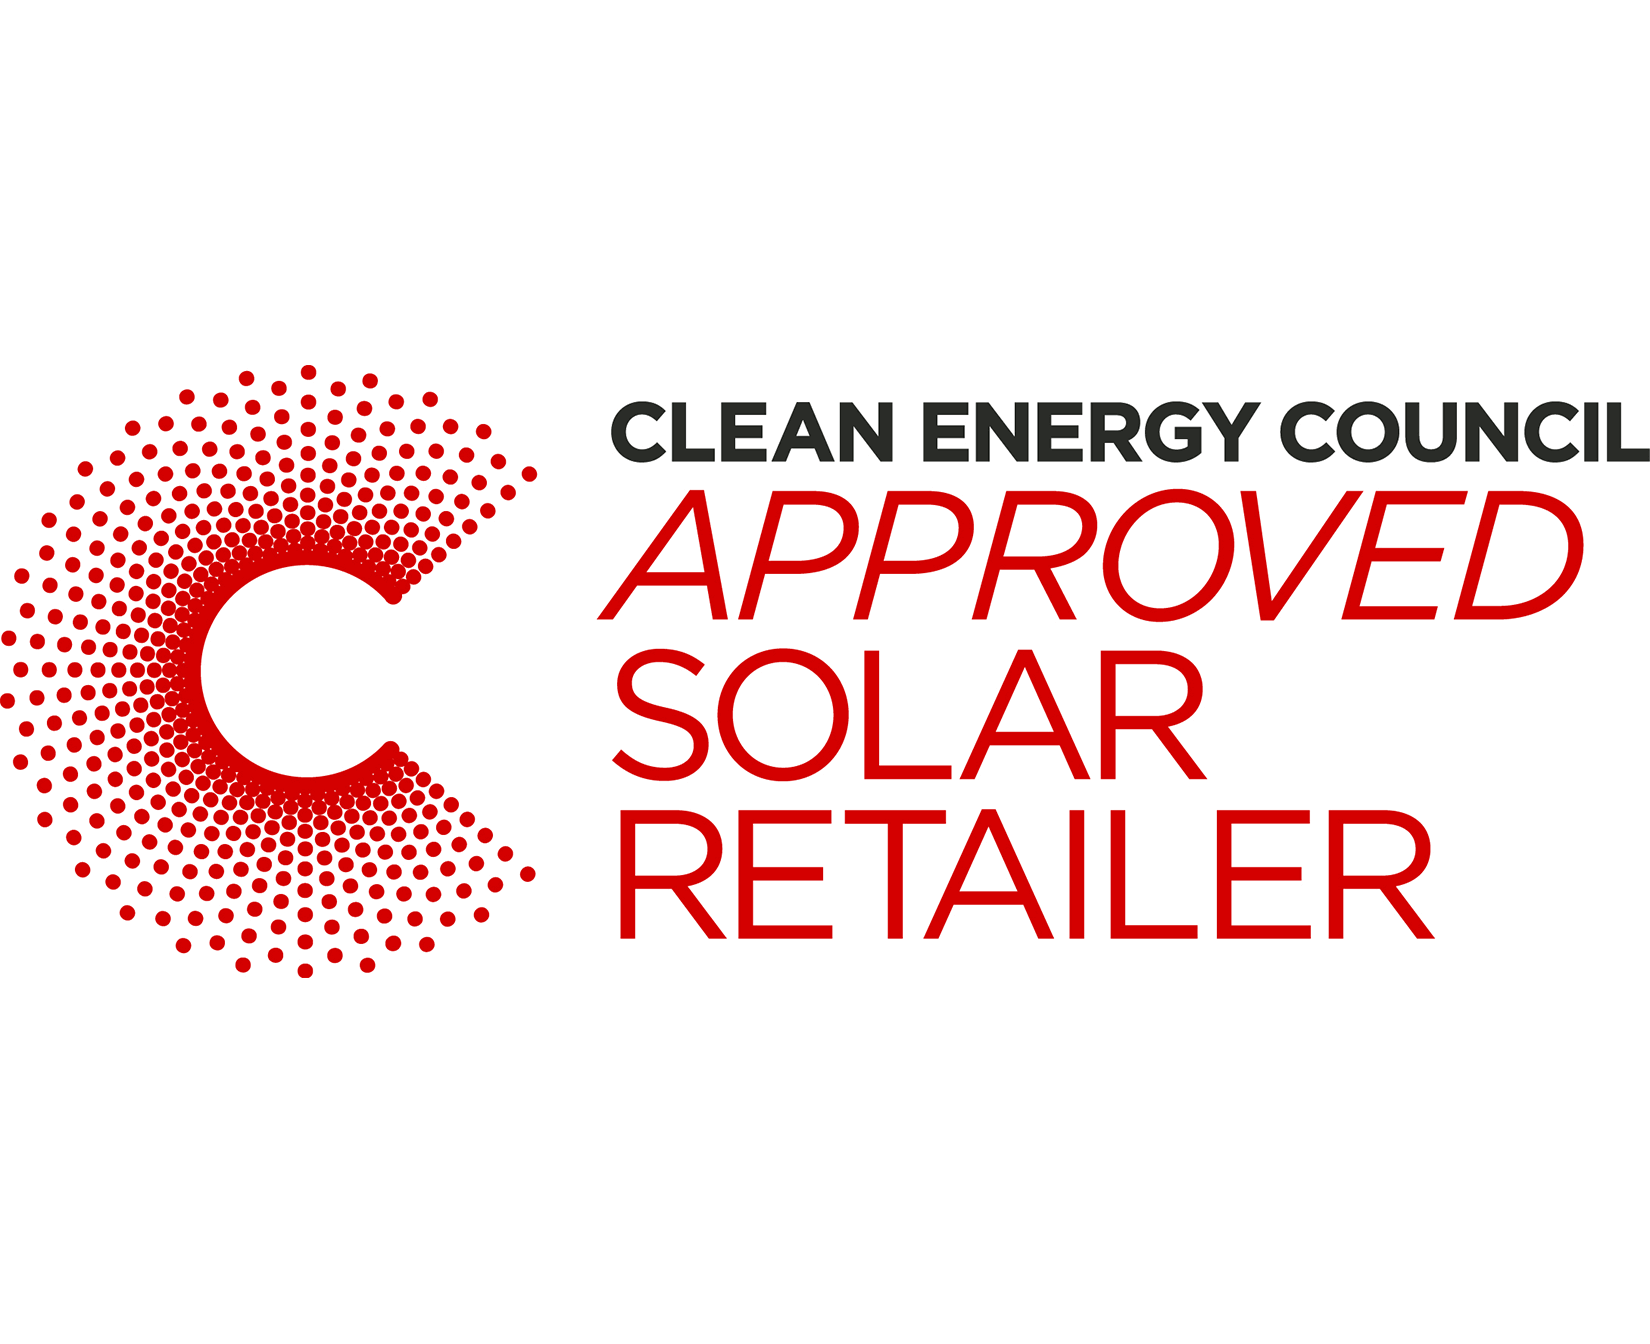 image of clean energy council approved solar retailer logo